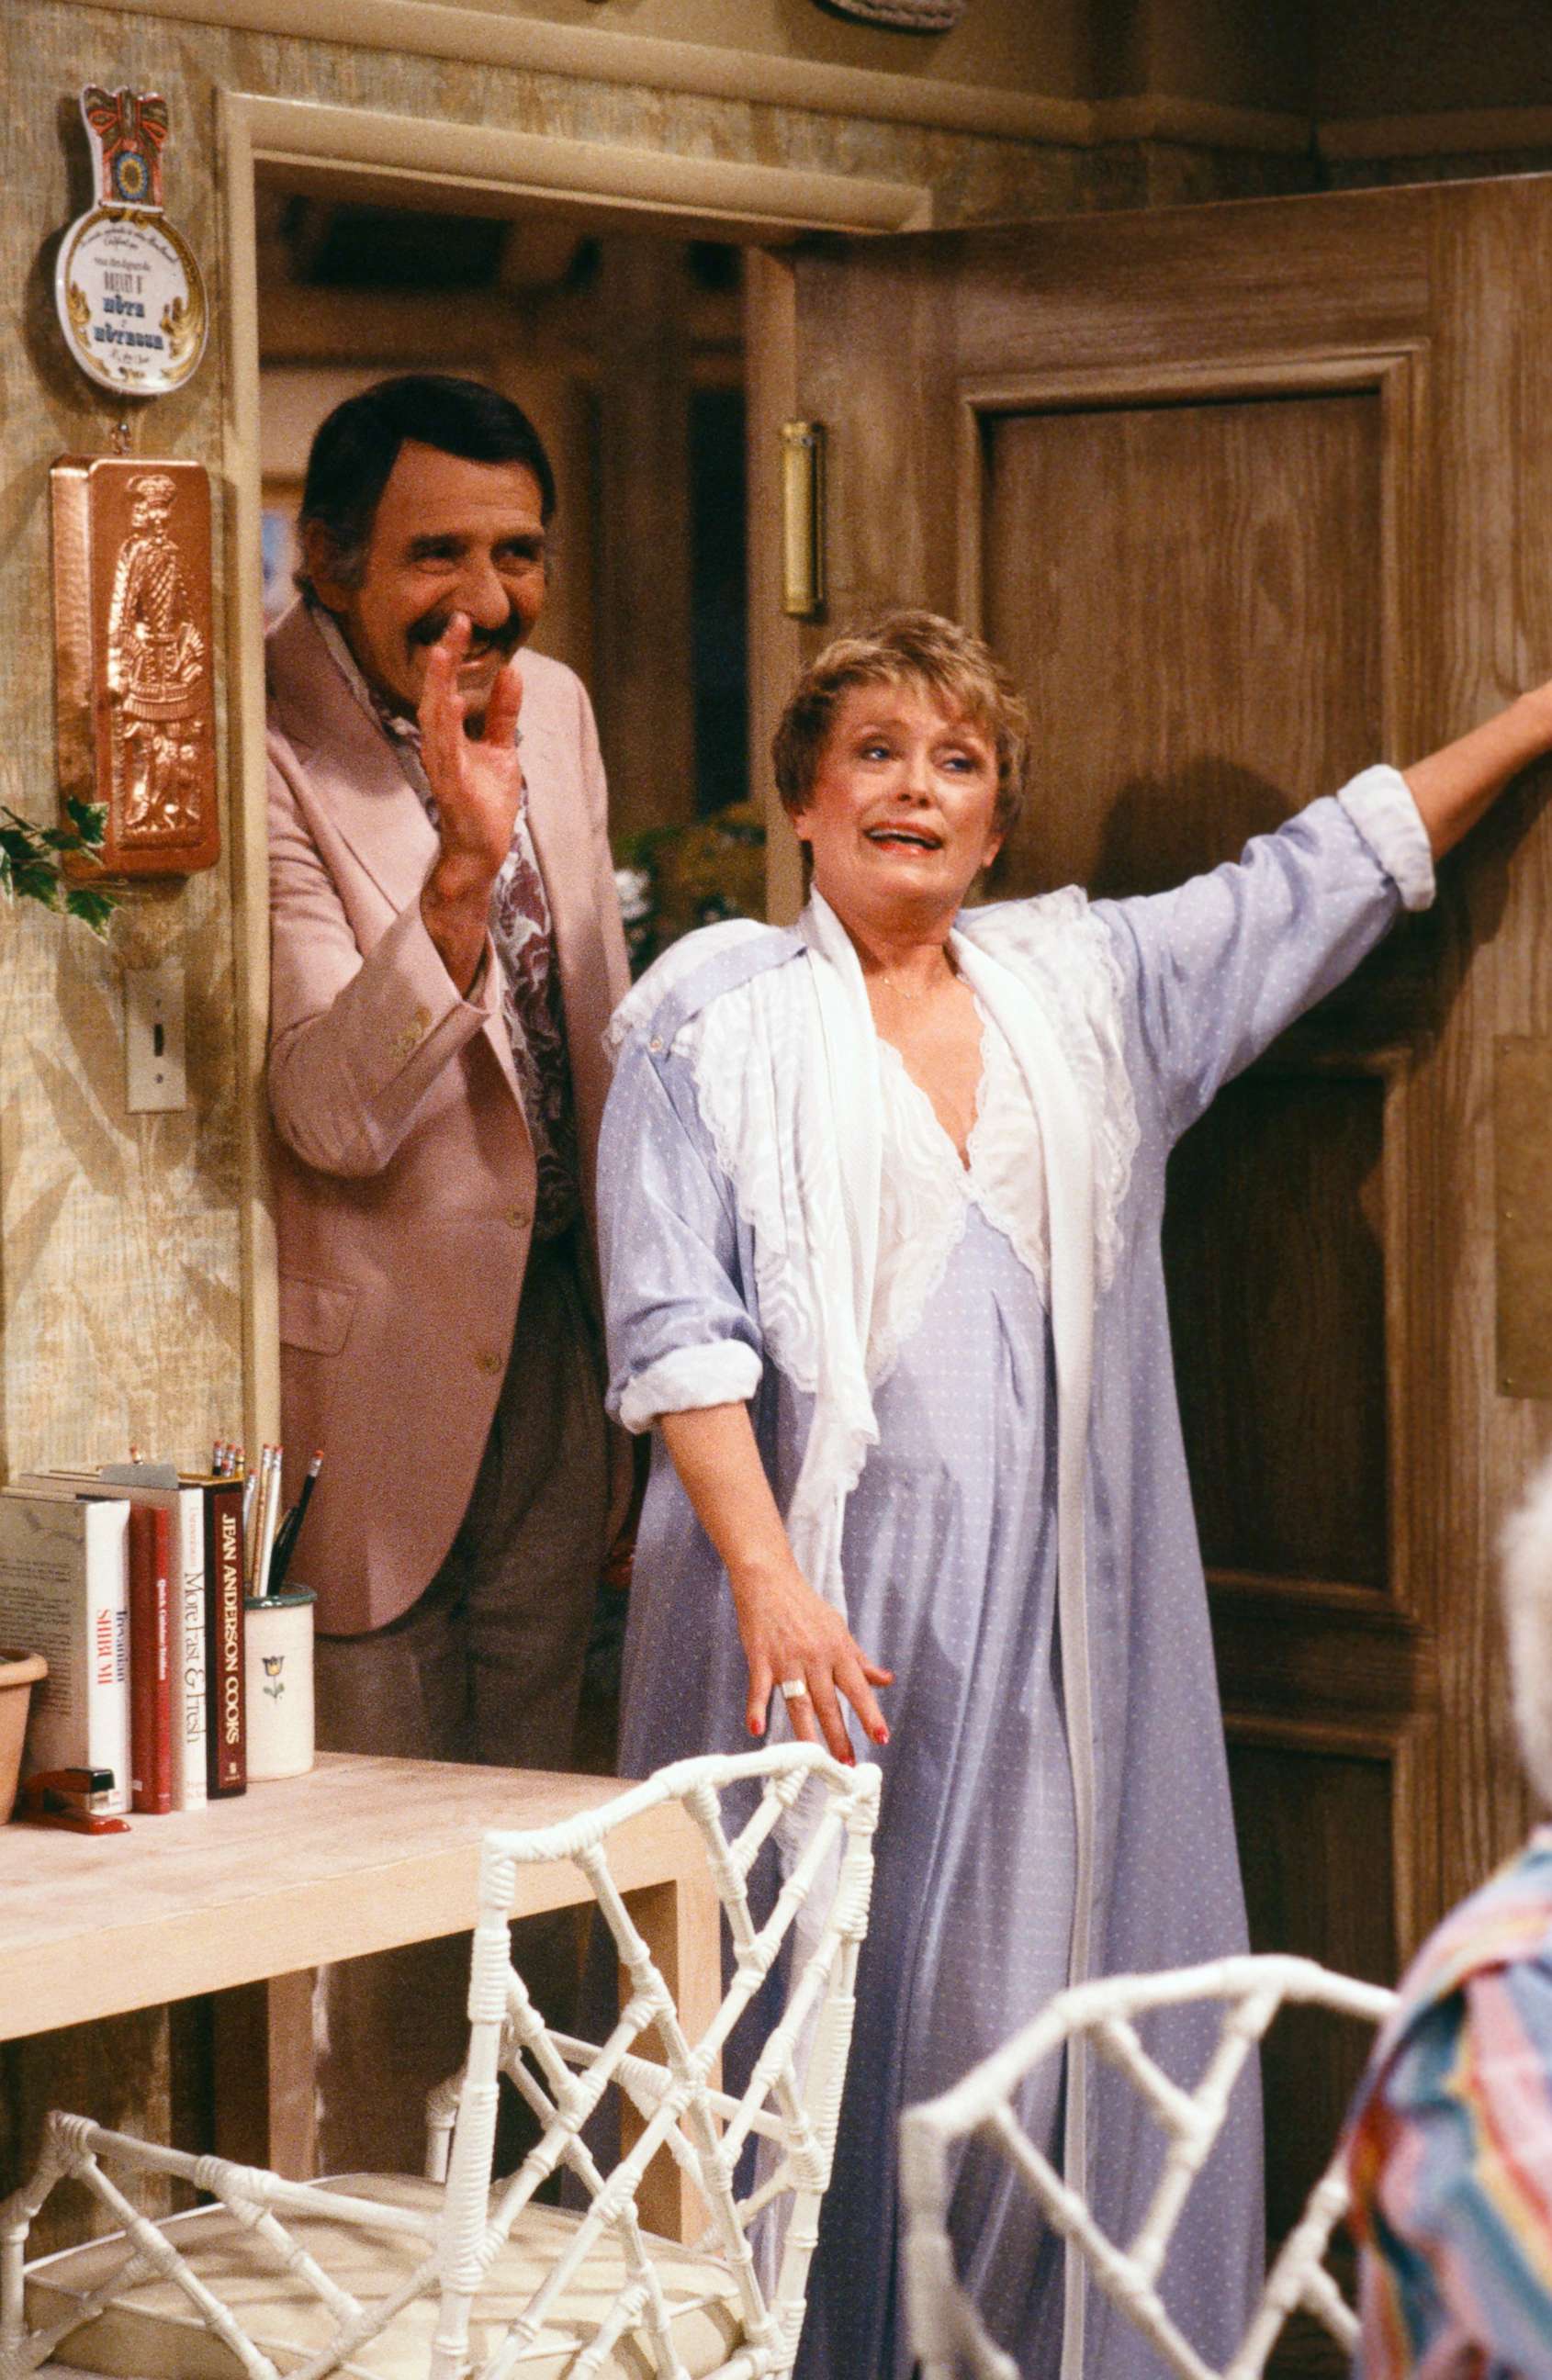 PHOTO: Rue McClanahan stars as Blanche Devereaux on "The Golden Girls." McLanahan got to keep all of Blanche's wardrobe in the show.